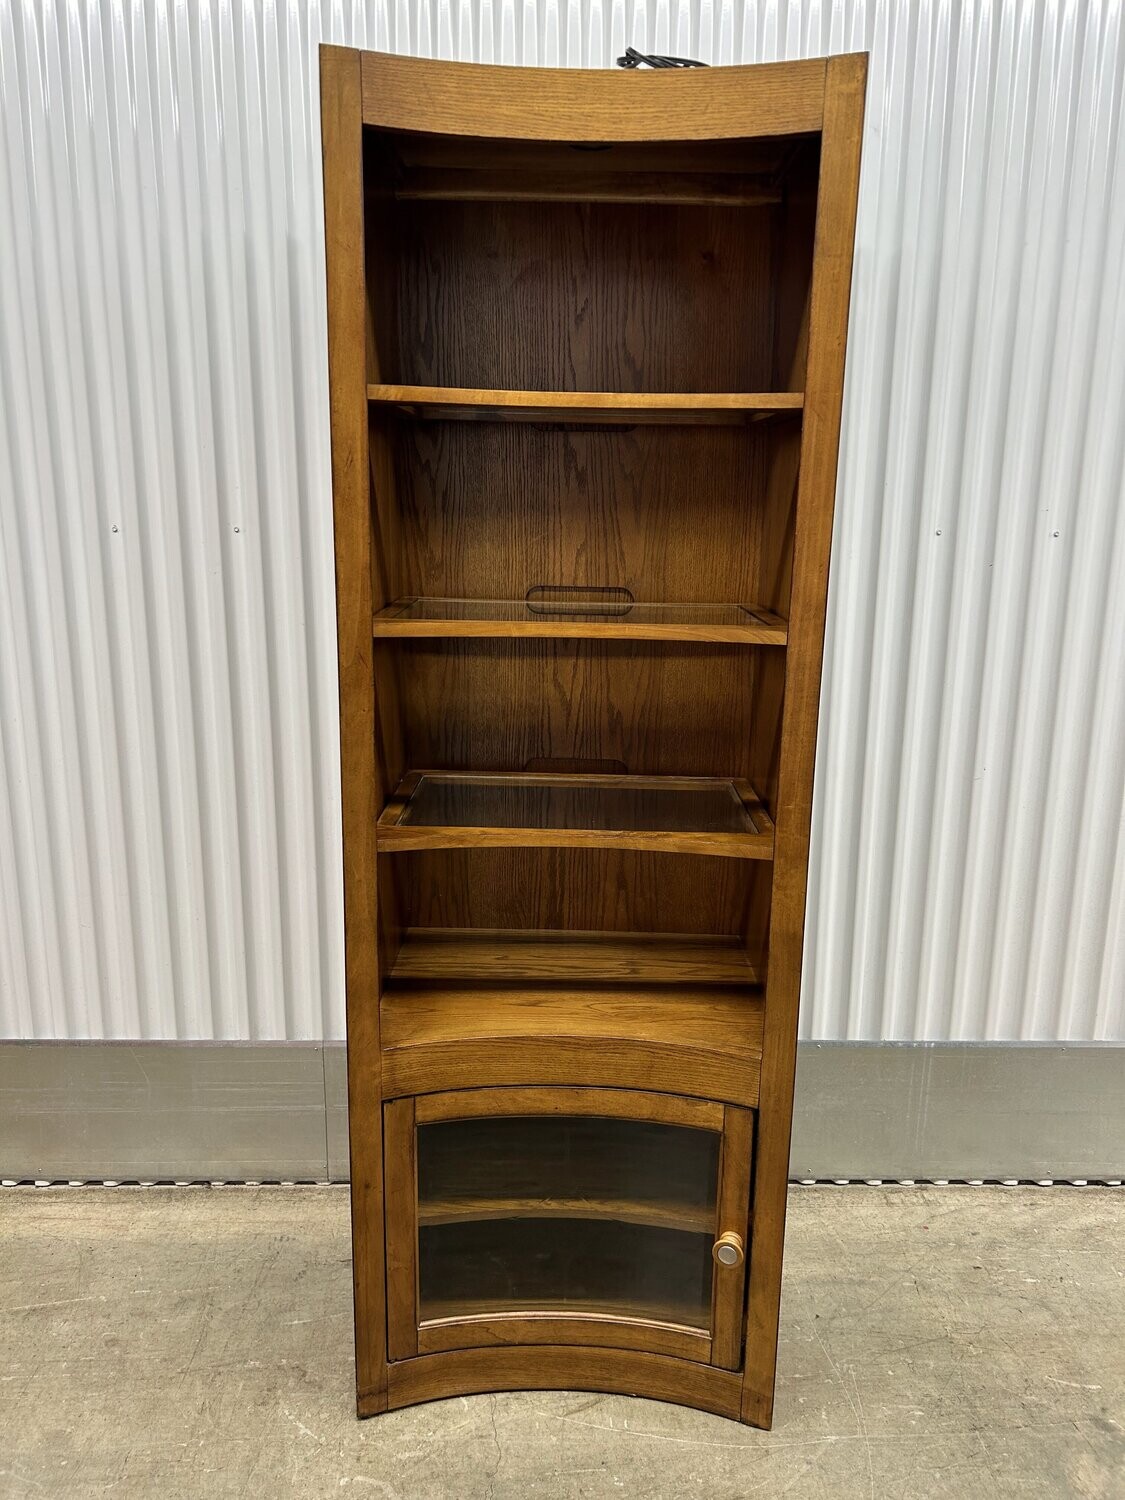 ** Oak Lighted Bookcase with curved front, glass shelves #2126 ** 2 wks. to sell, full price